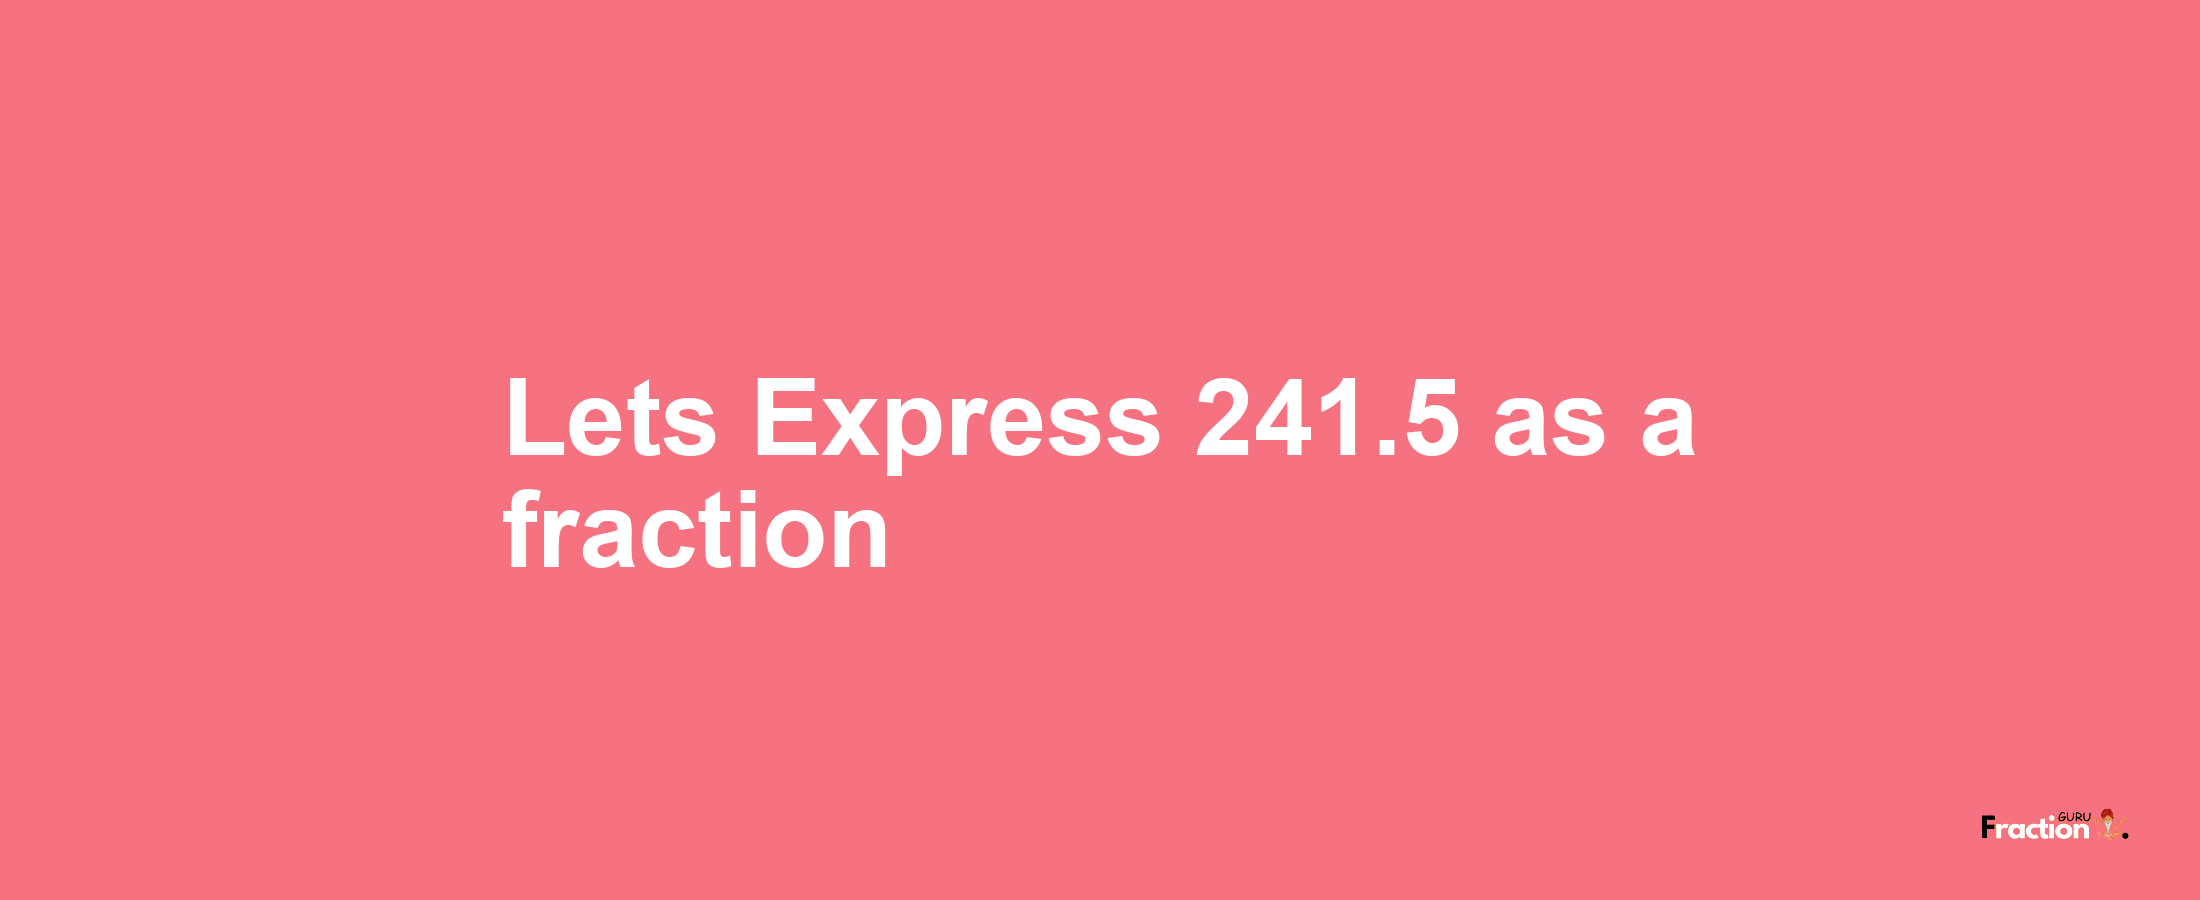 Lets Express 241.5 as afraction